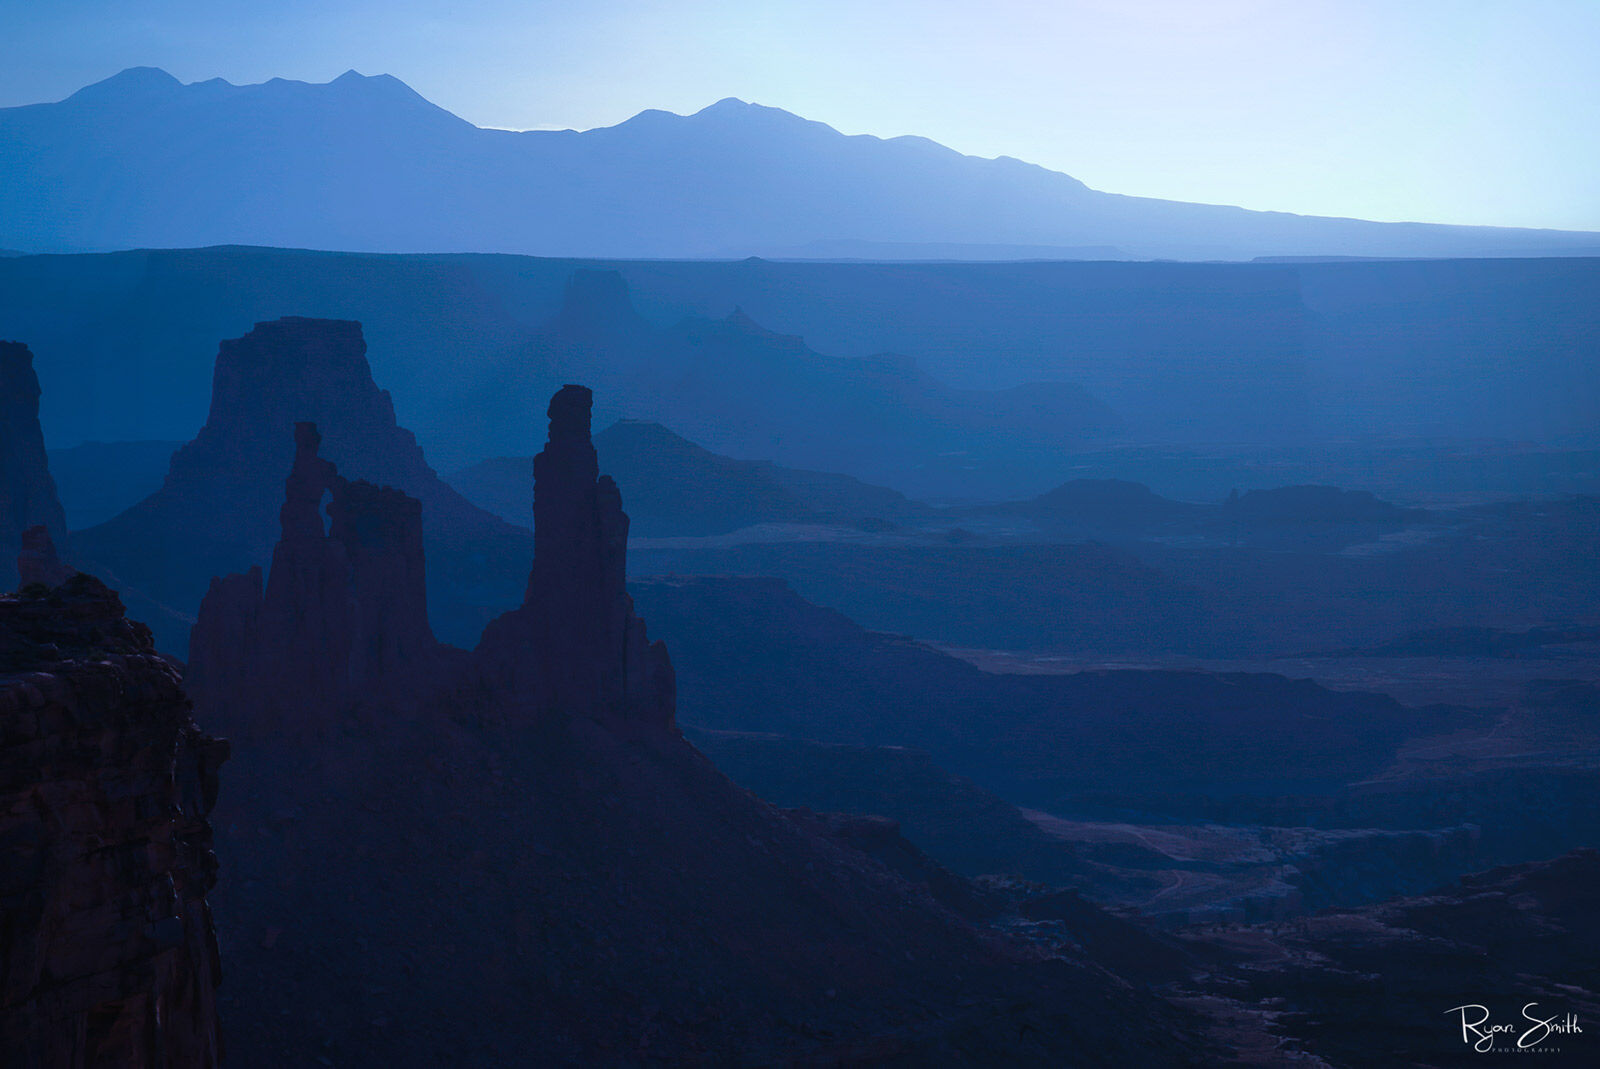 With the sun below the horizon at sunrise, a desert landscape shows hues of blue with first light and blue silhouettes of the rock formations and sky line.